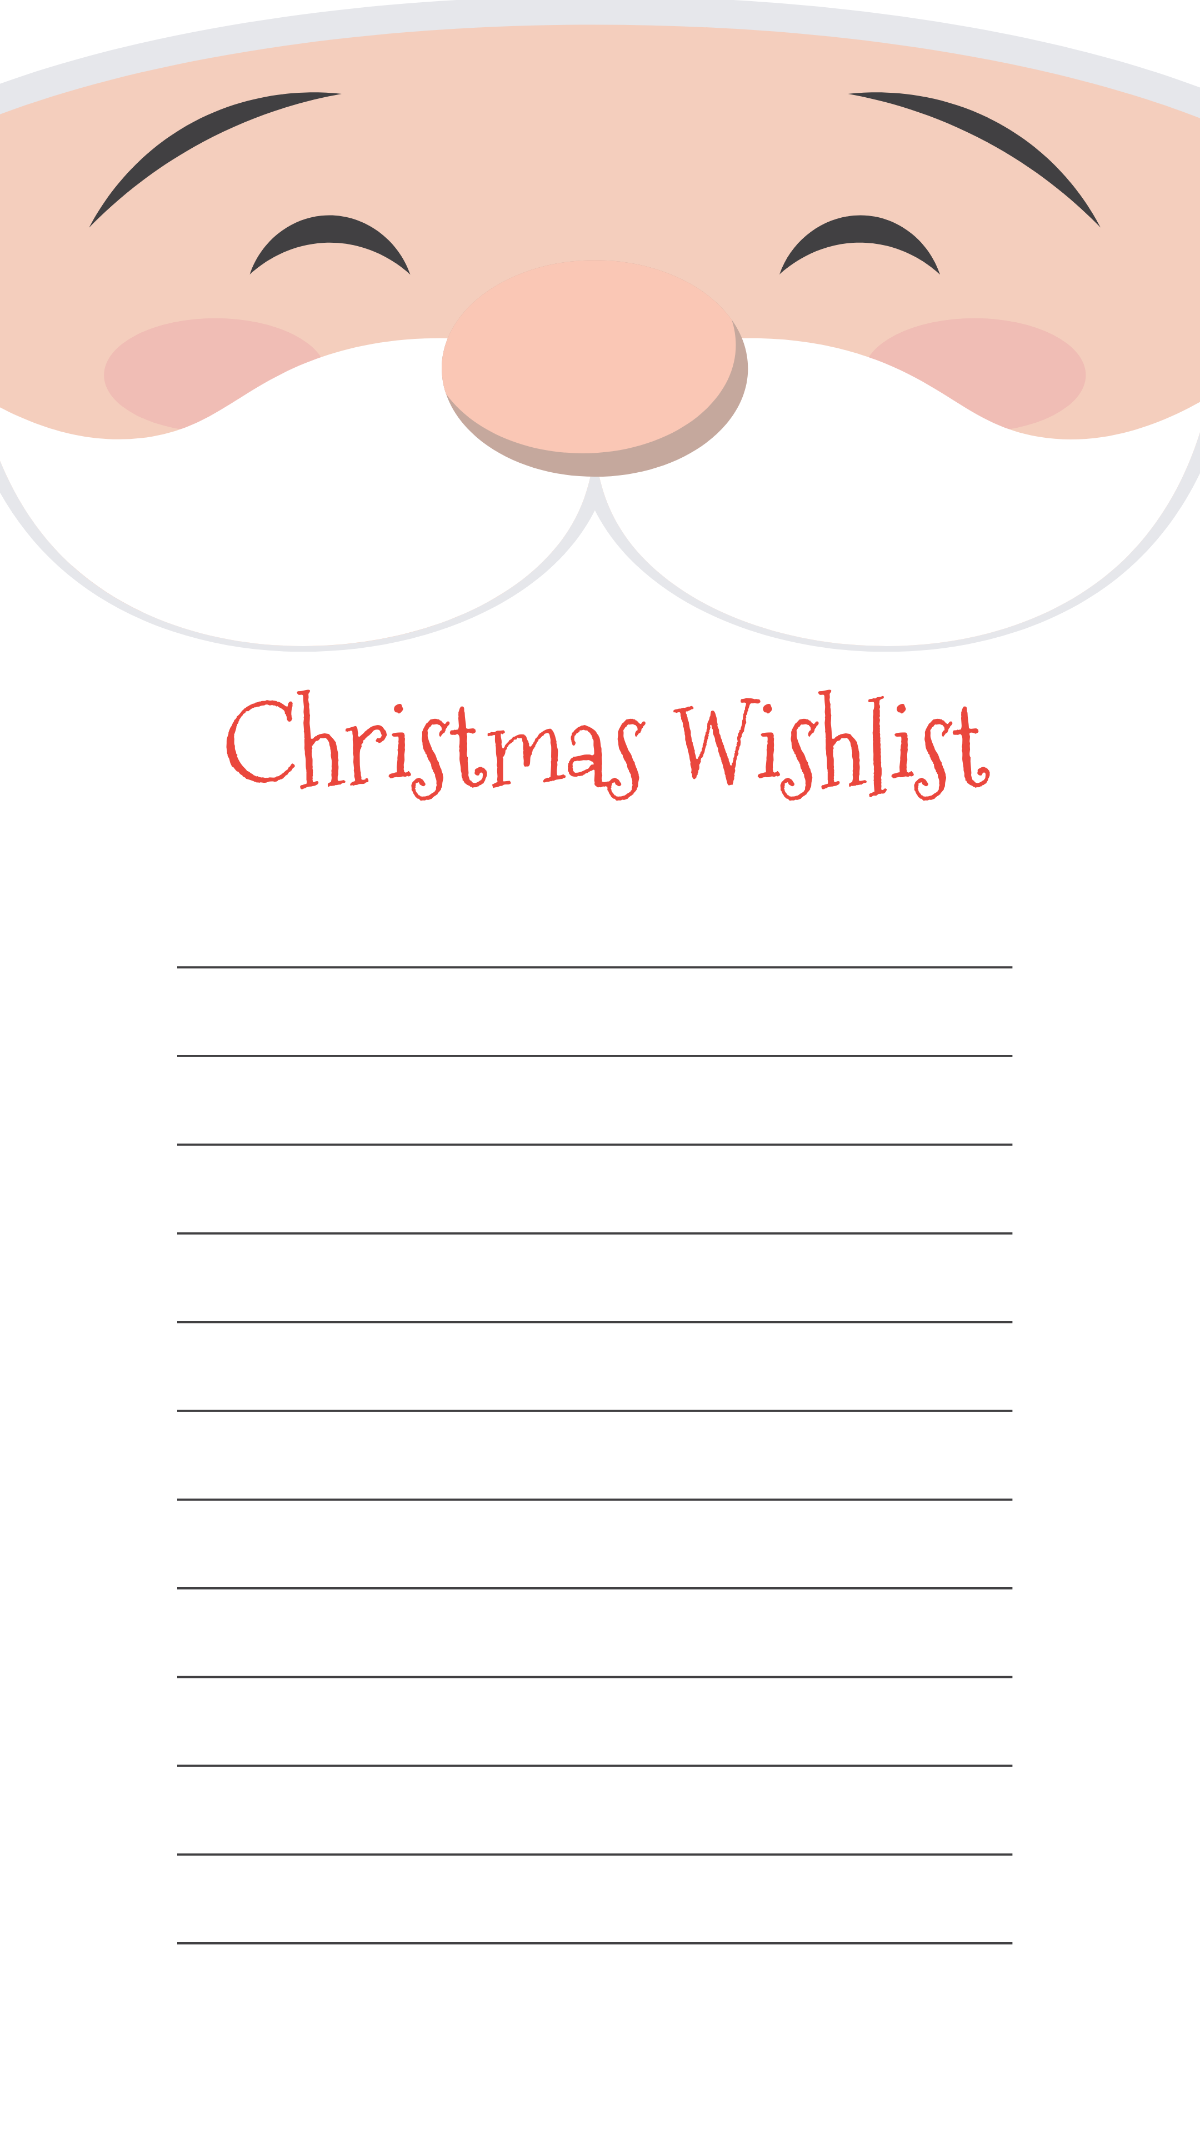 Free Printable Christmas Wish List Templates in PDF, PNG and JPG